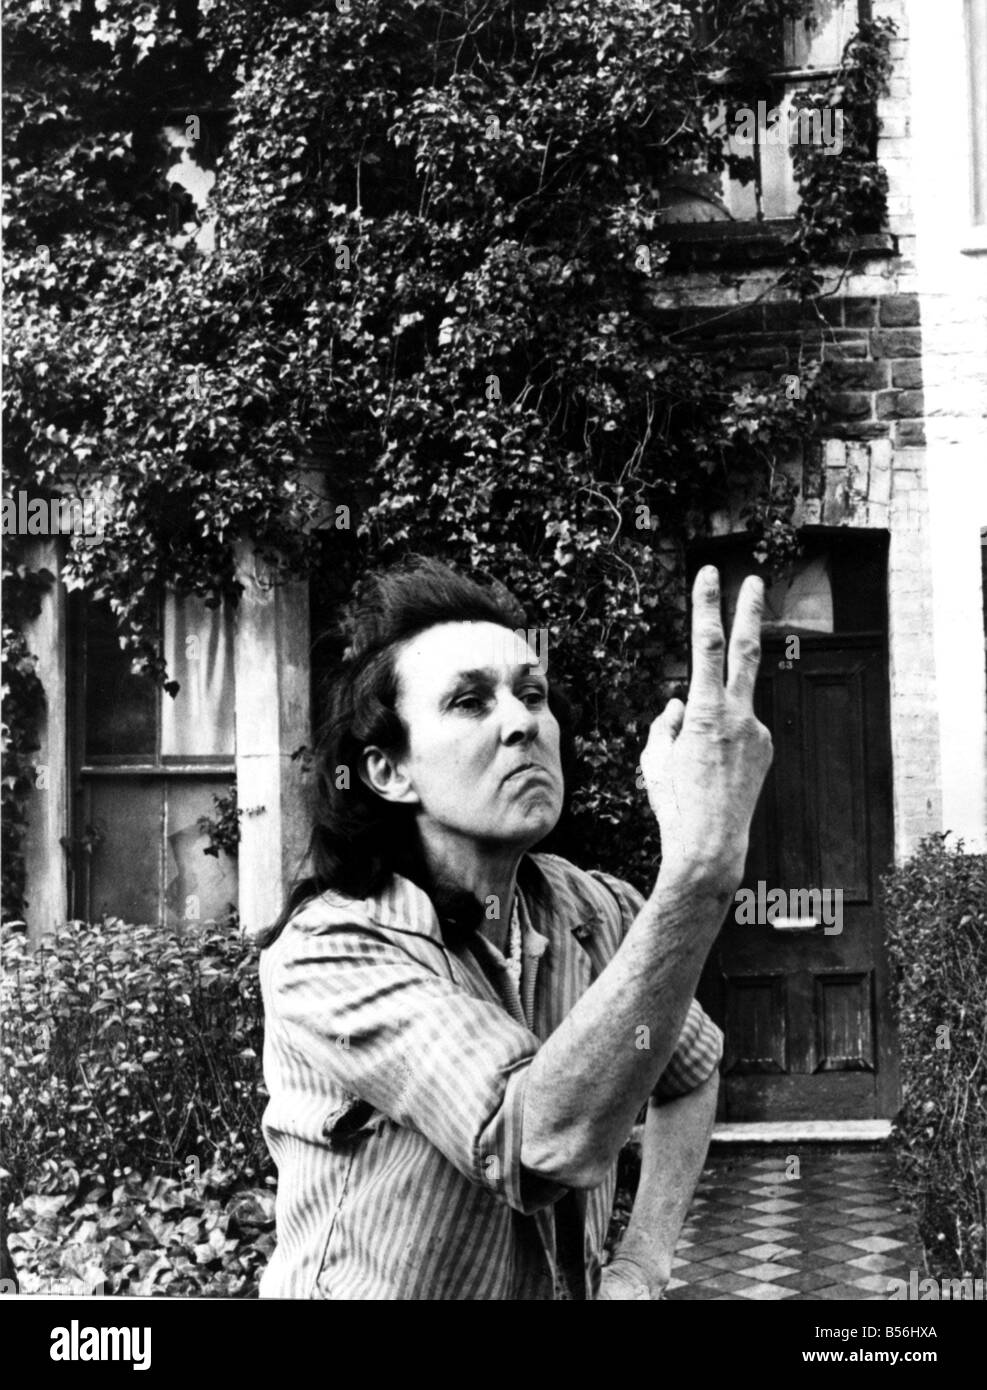 Animal lover Miss Margaret Williiams outside her house in Richards Street Cathays were she lives with her dogs and cats shows her feelings towards her nosey neighbours with a two fingered salute 25th Feburary 1977 Western Mail and Echo Copyright Image Stock Photo